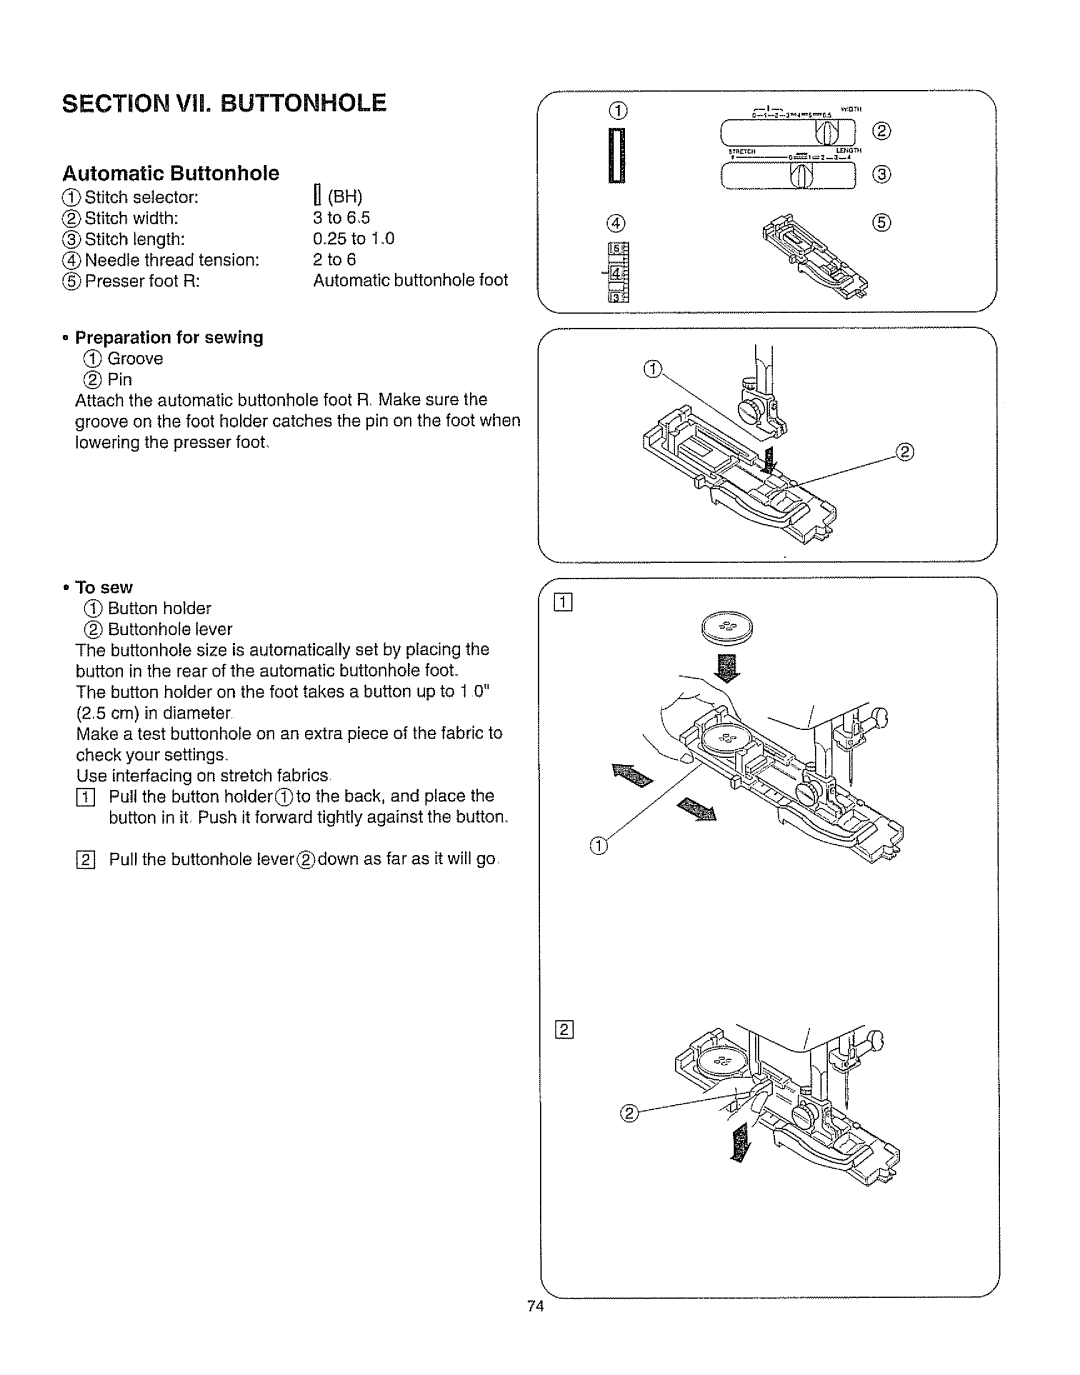 Kenmore 385.162213 owner manual SECTION Vii. BUTTONHOLE, Automatic, Buttonhole, o Preparation 